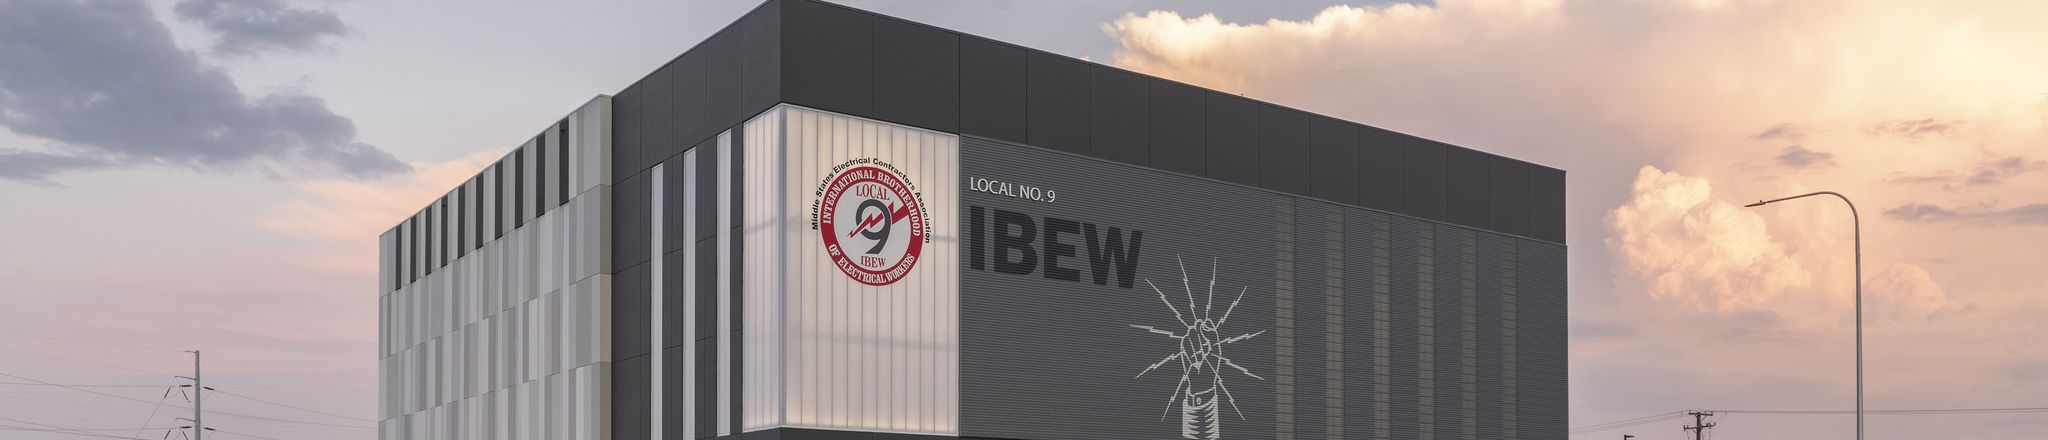 evening shot of IBEW training building with sky